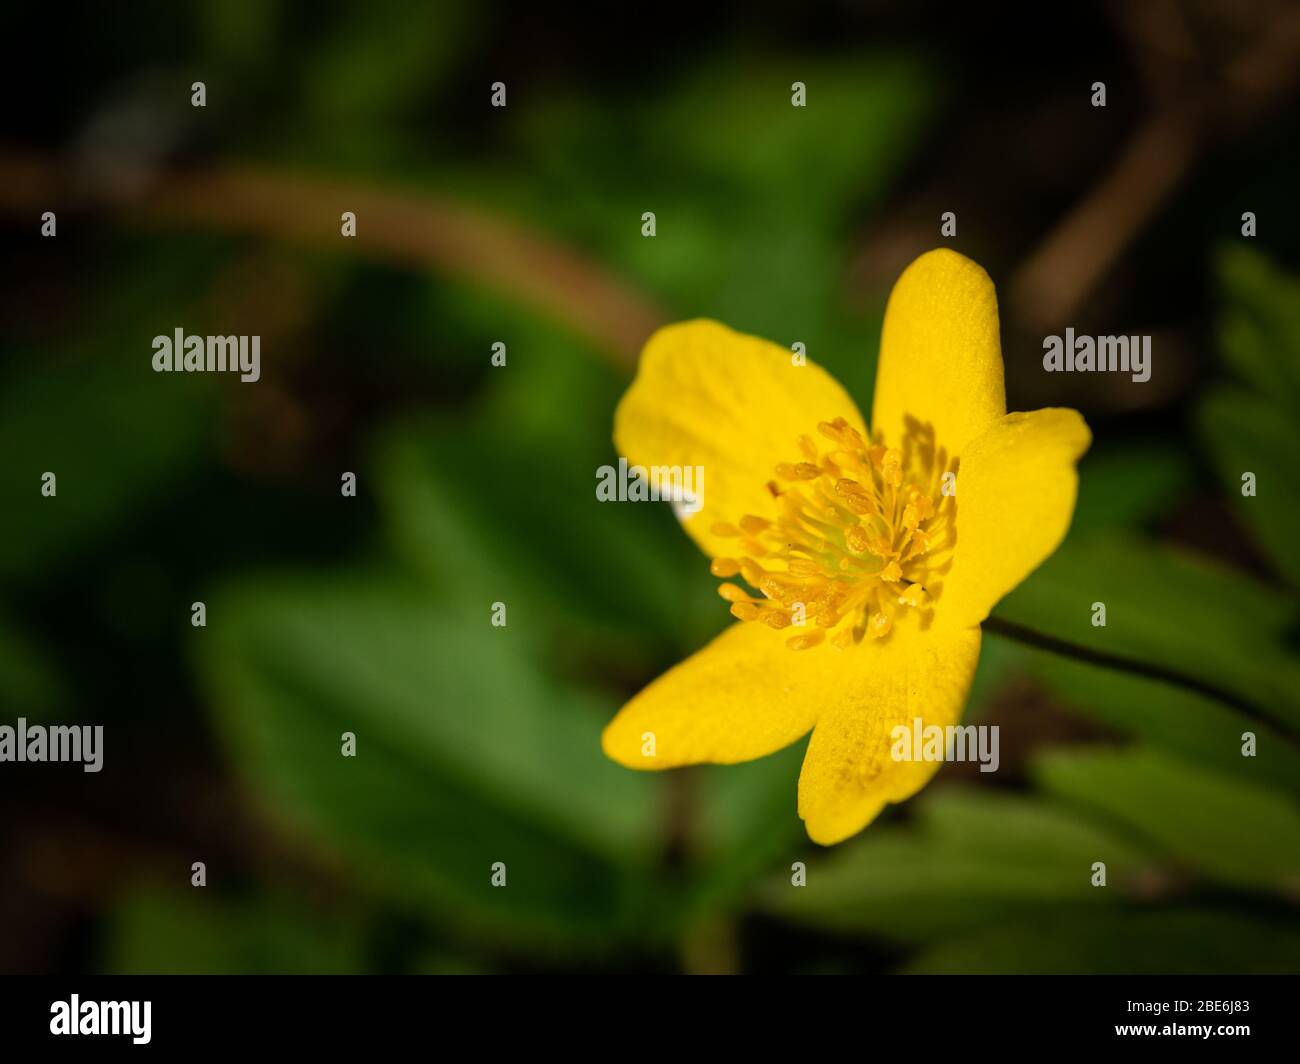 Macro shot of yellow flower with scientific name: ficaria verna but have a lot of different names: fig buttercup, lesser celandine, pilewort,. Stock Photo